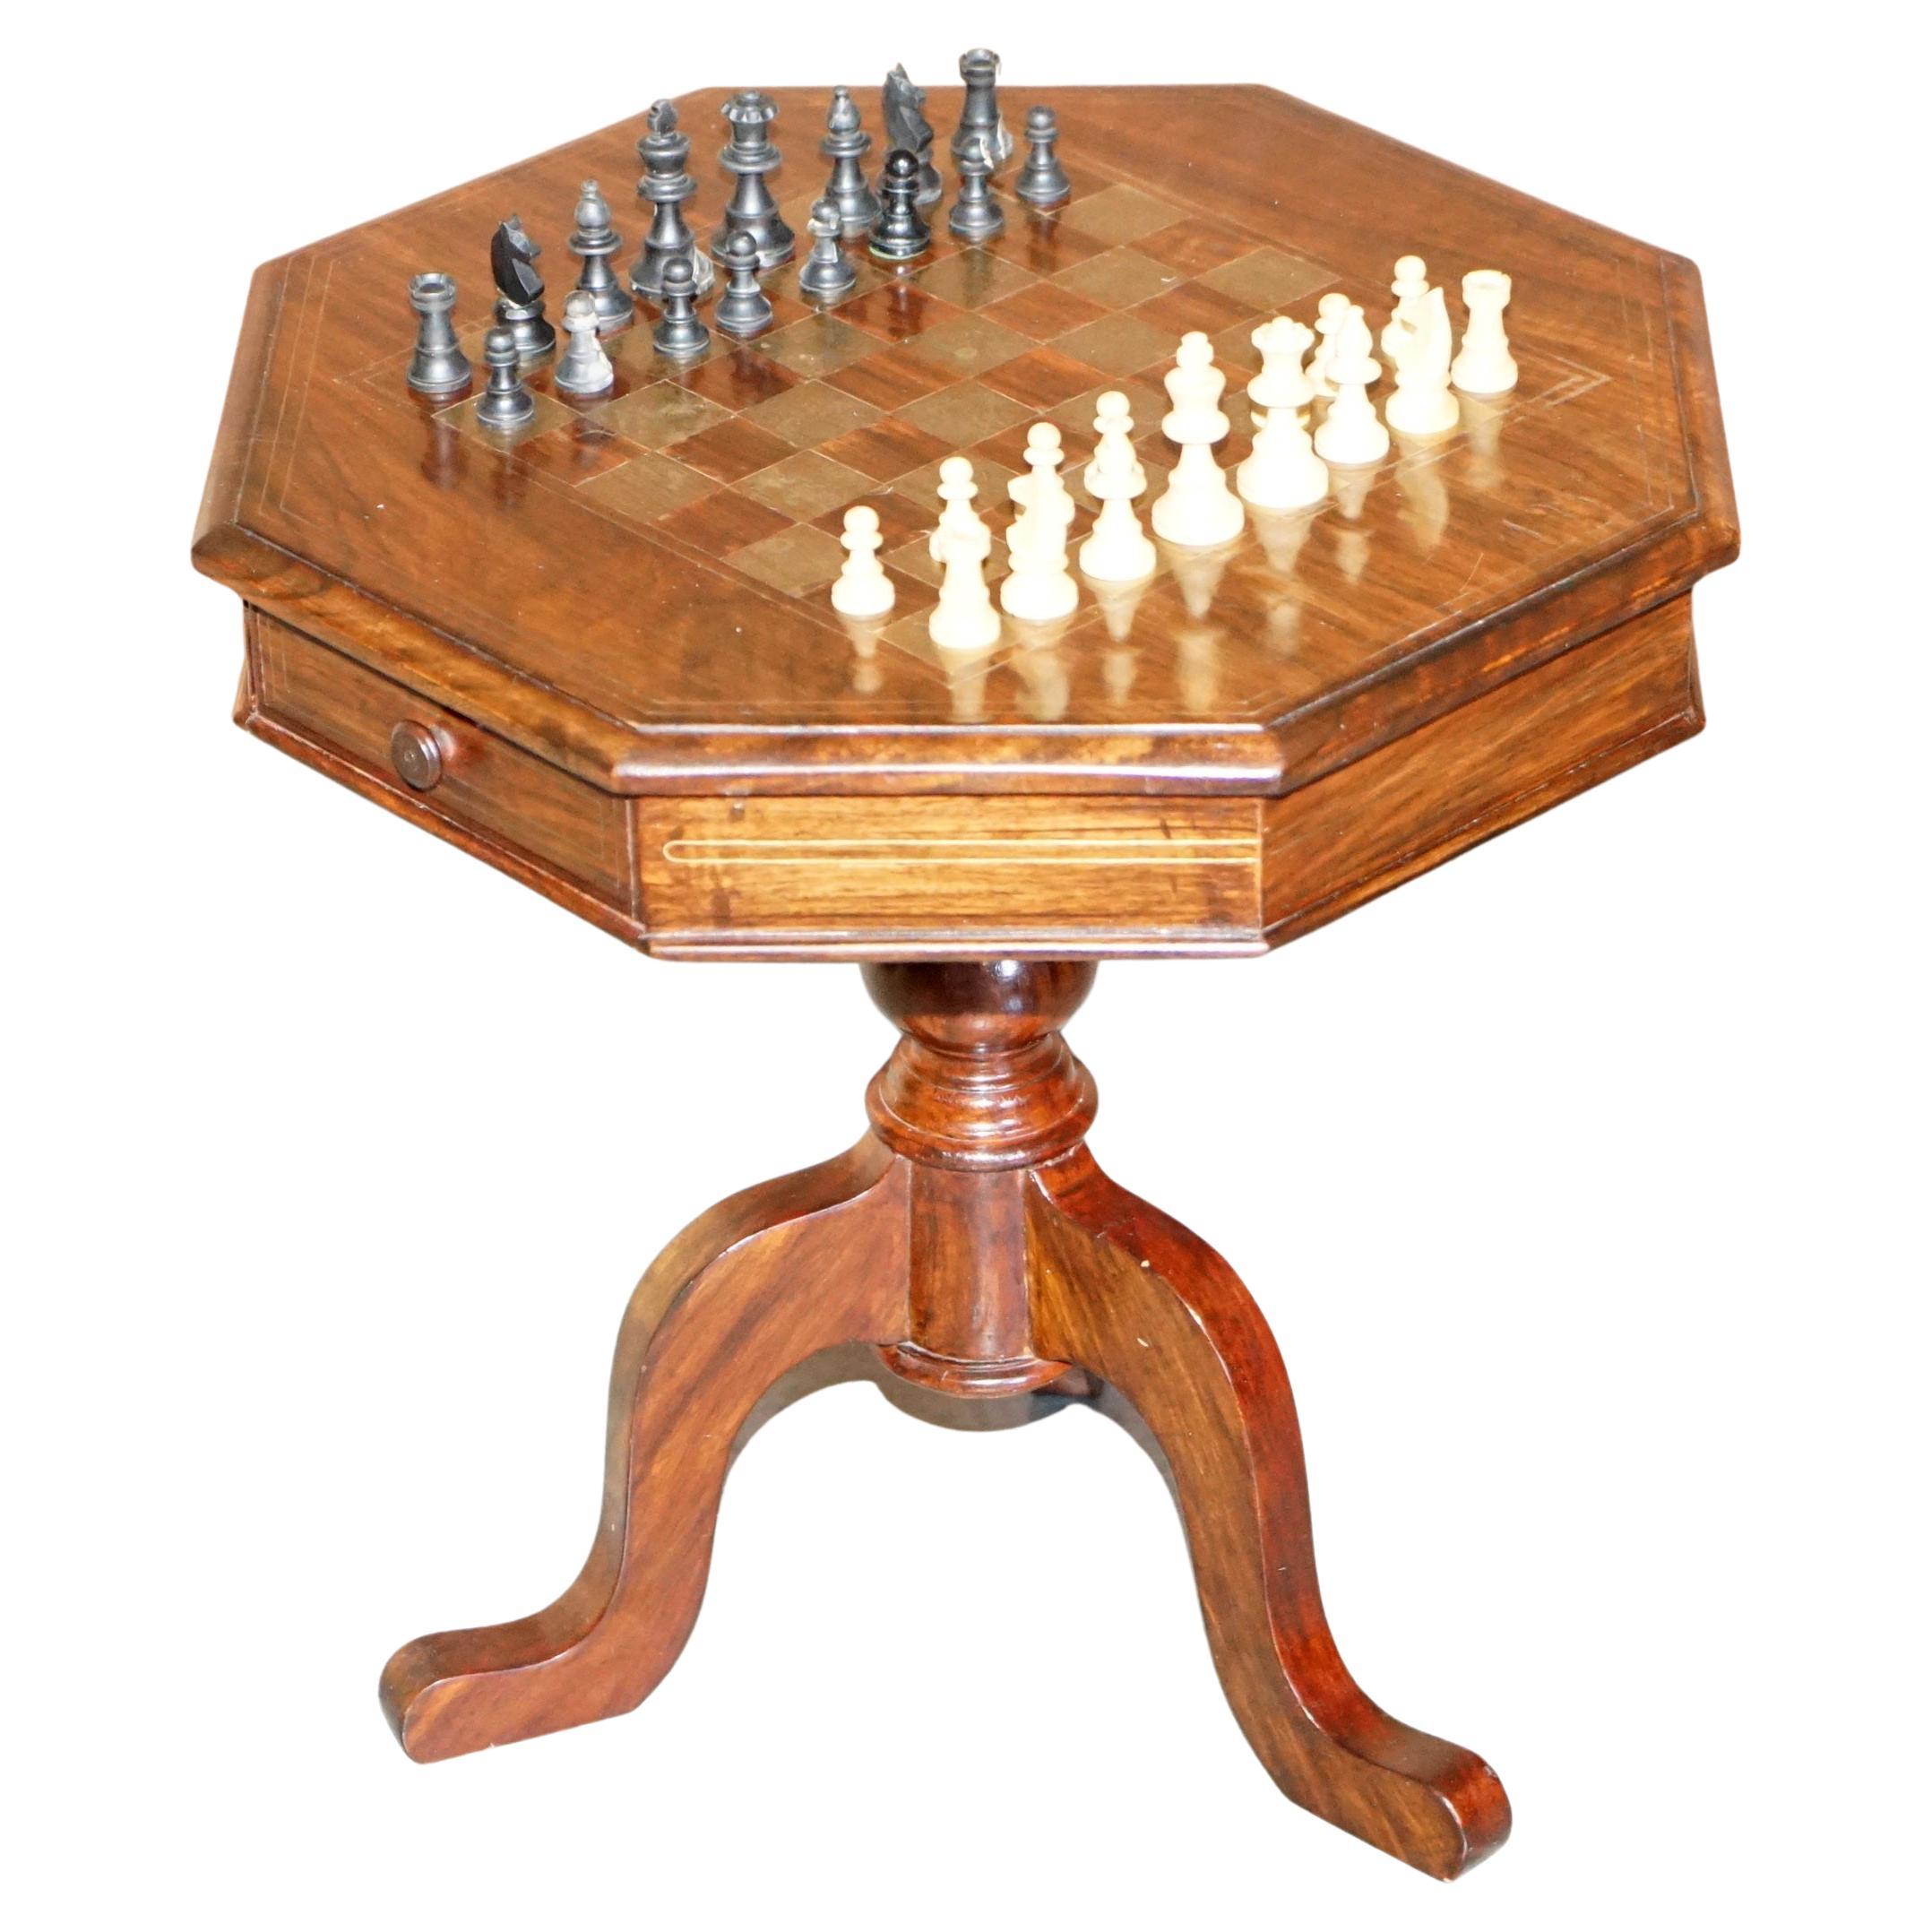 Antique Victorain Hardwood Brass Inlaid Chess Games Table with Staunton Pieces